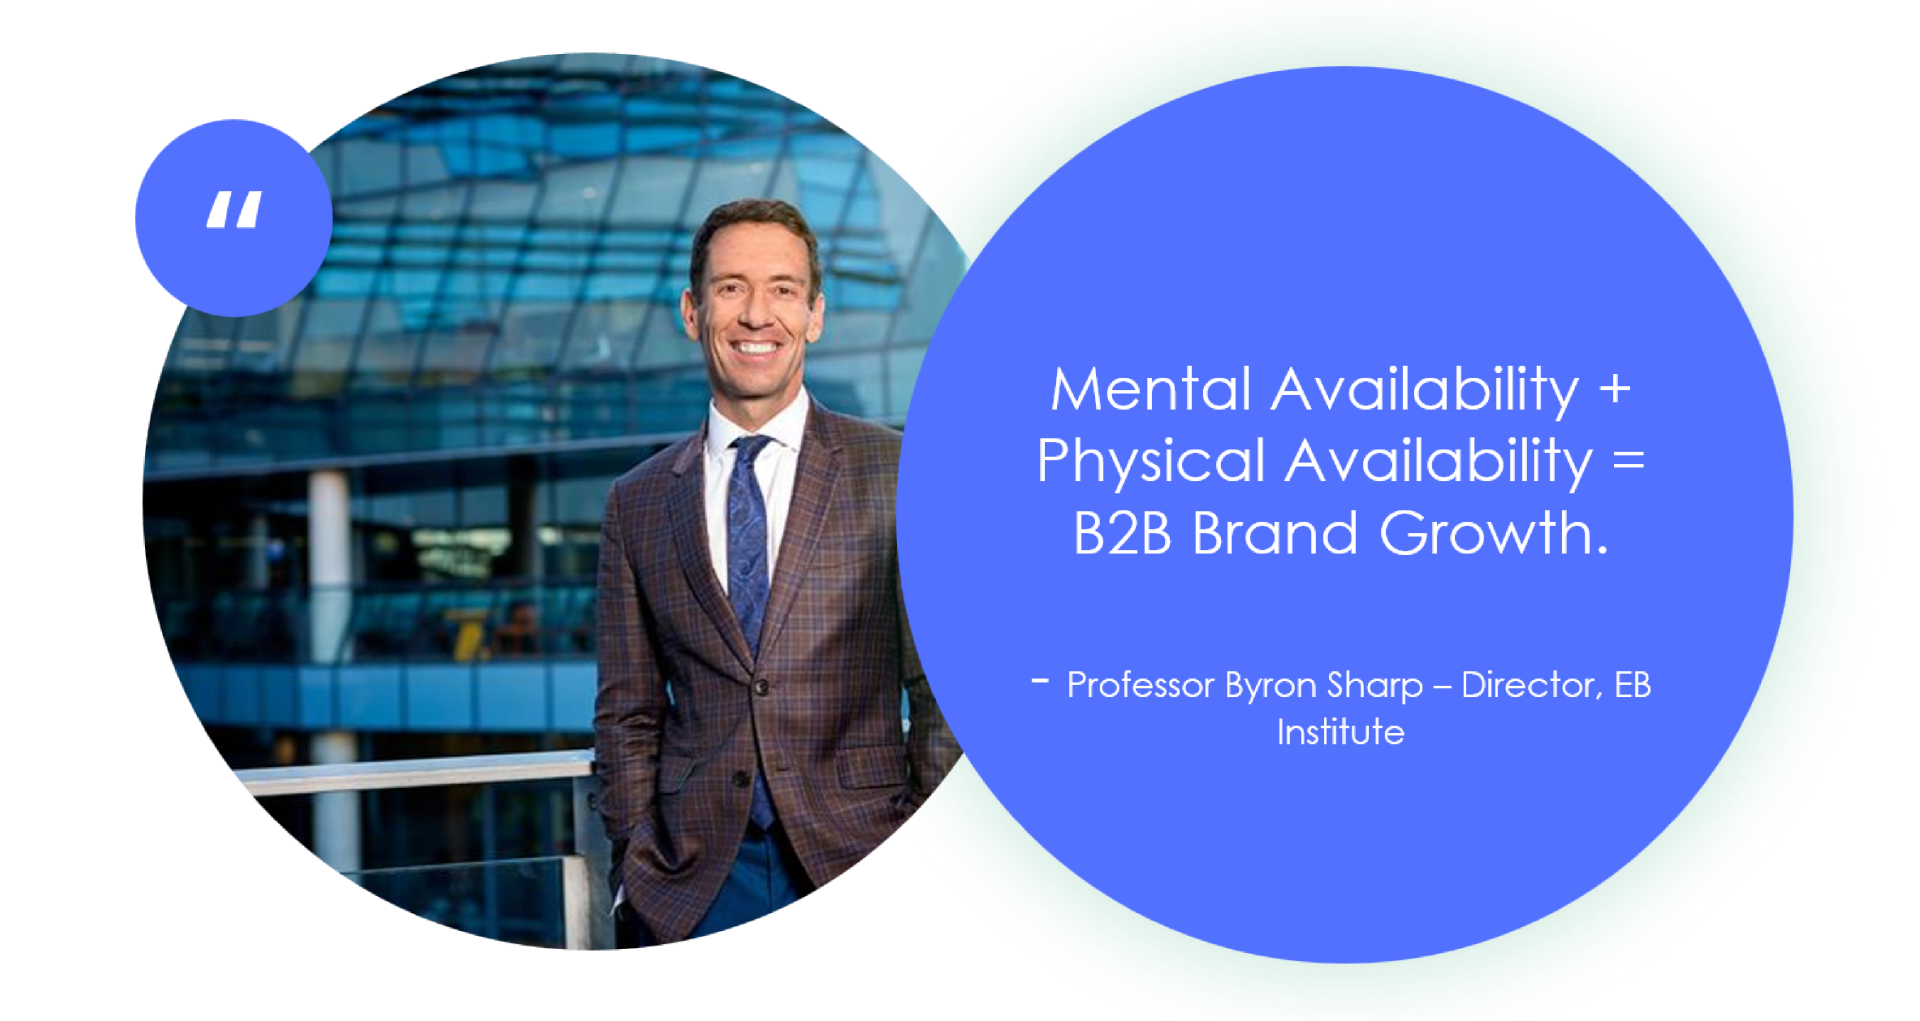 Mental Availability plus Physical Availability equals B2B Brand Growth